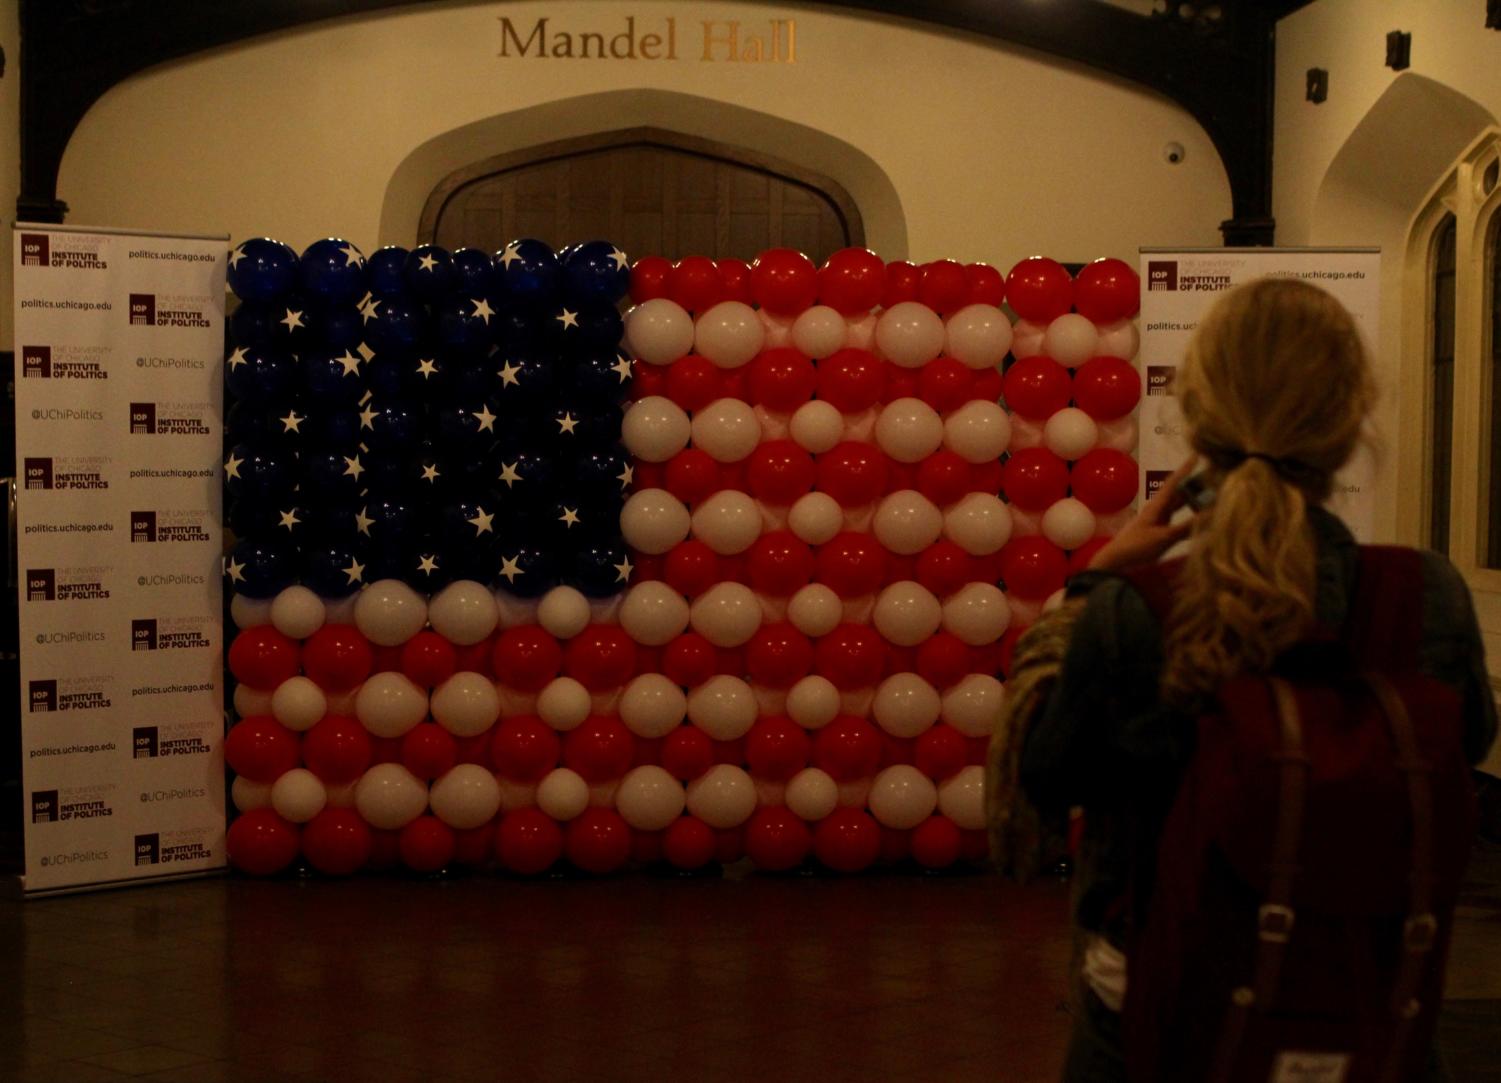 The IOP set up an American flag balloon photo backdrop in Reynolds Club.